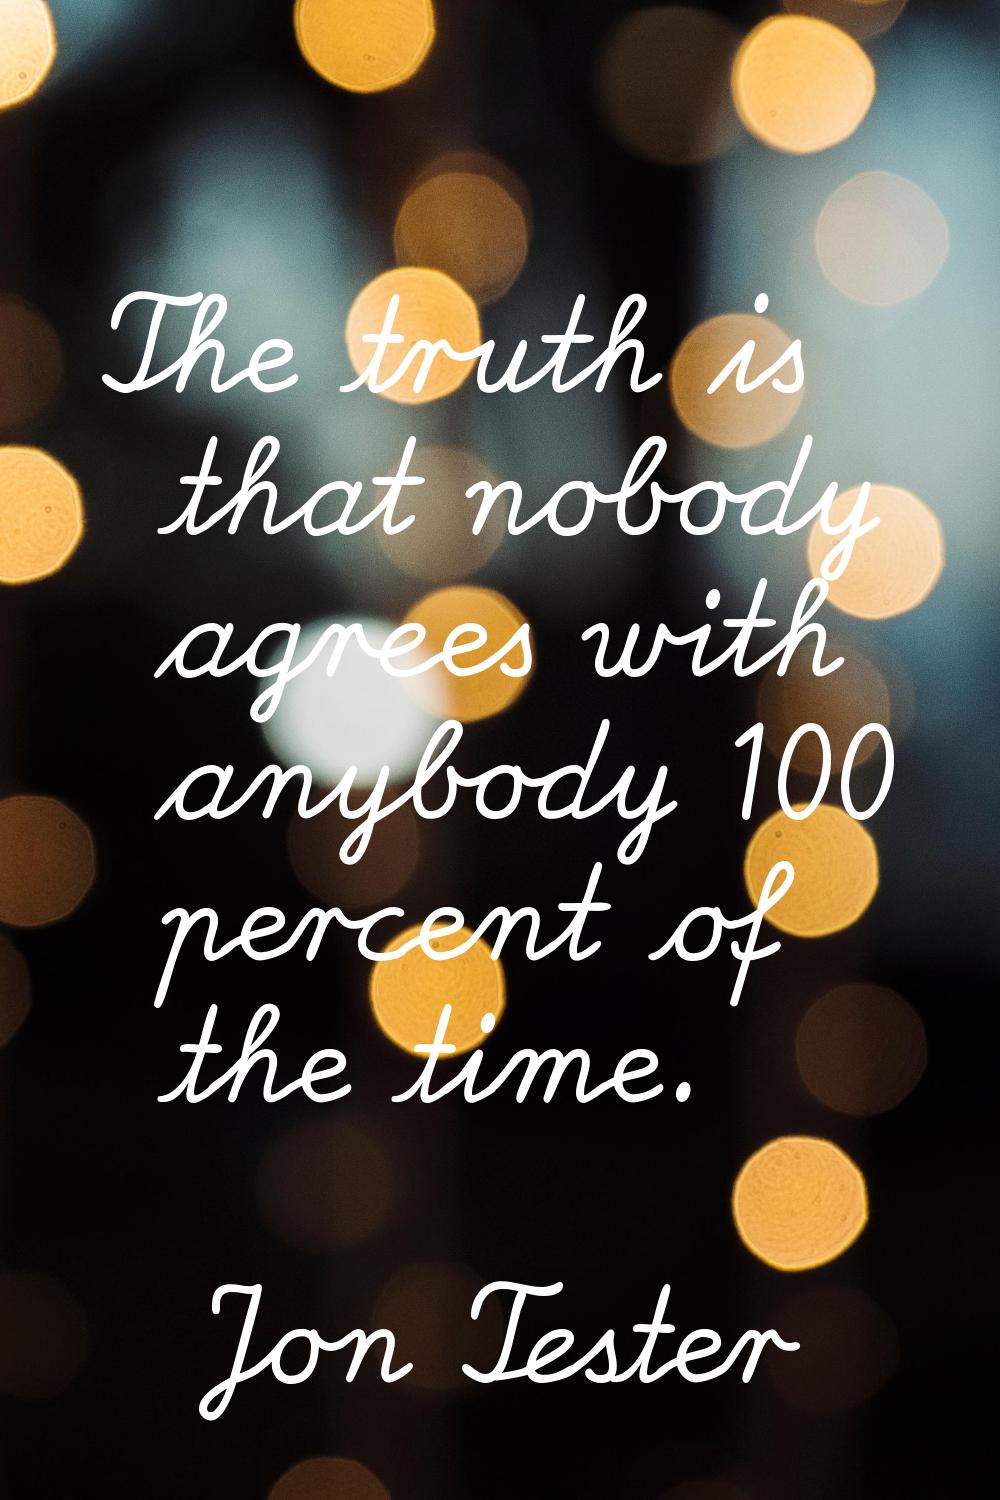 The truth is that nobody agrees with anybody 100 percent of the time.